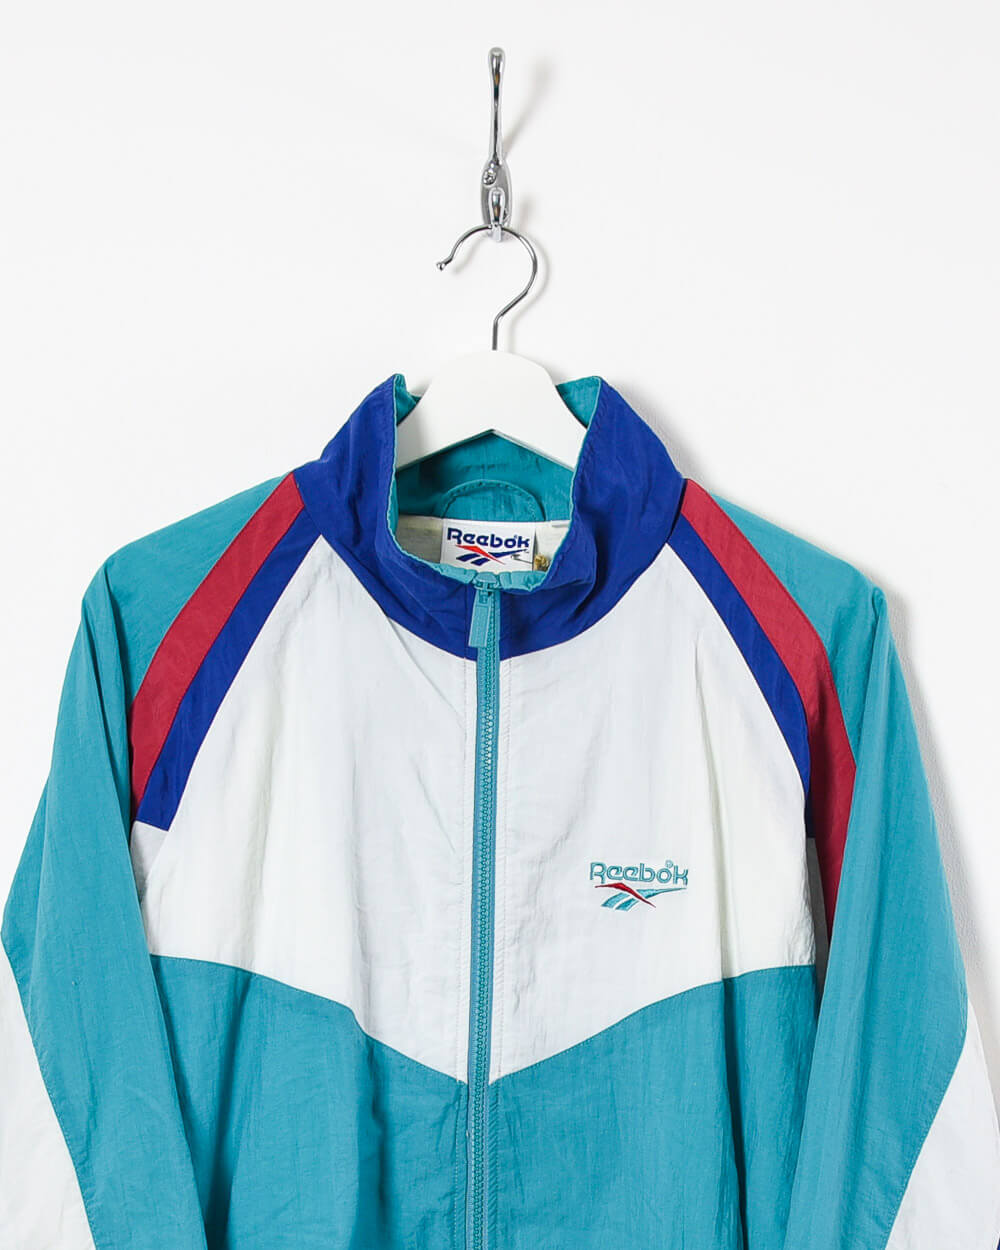 Reebok Shell Jacket - Large - Domno Vintage 90s, 80s, 00s Retro and Vintage Clothing 